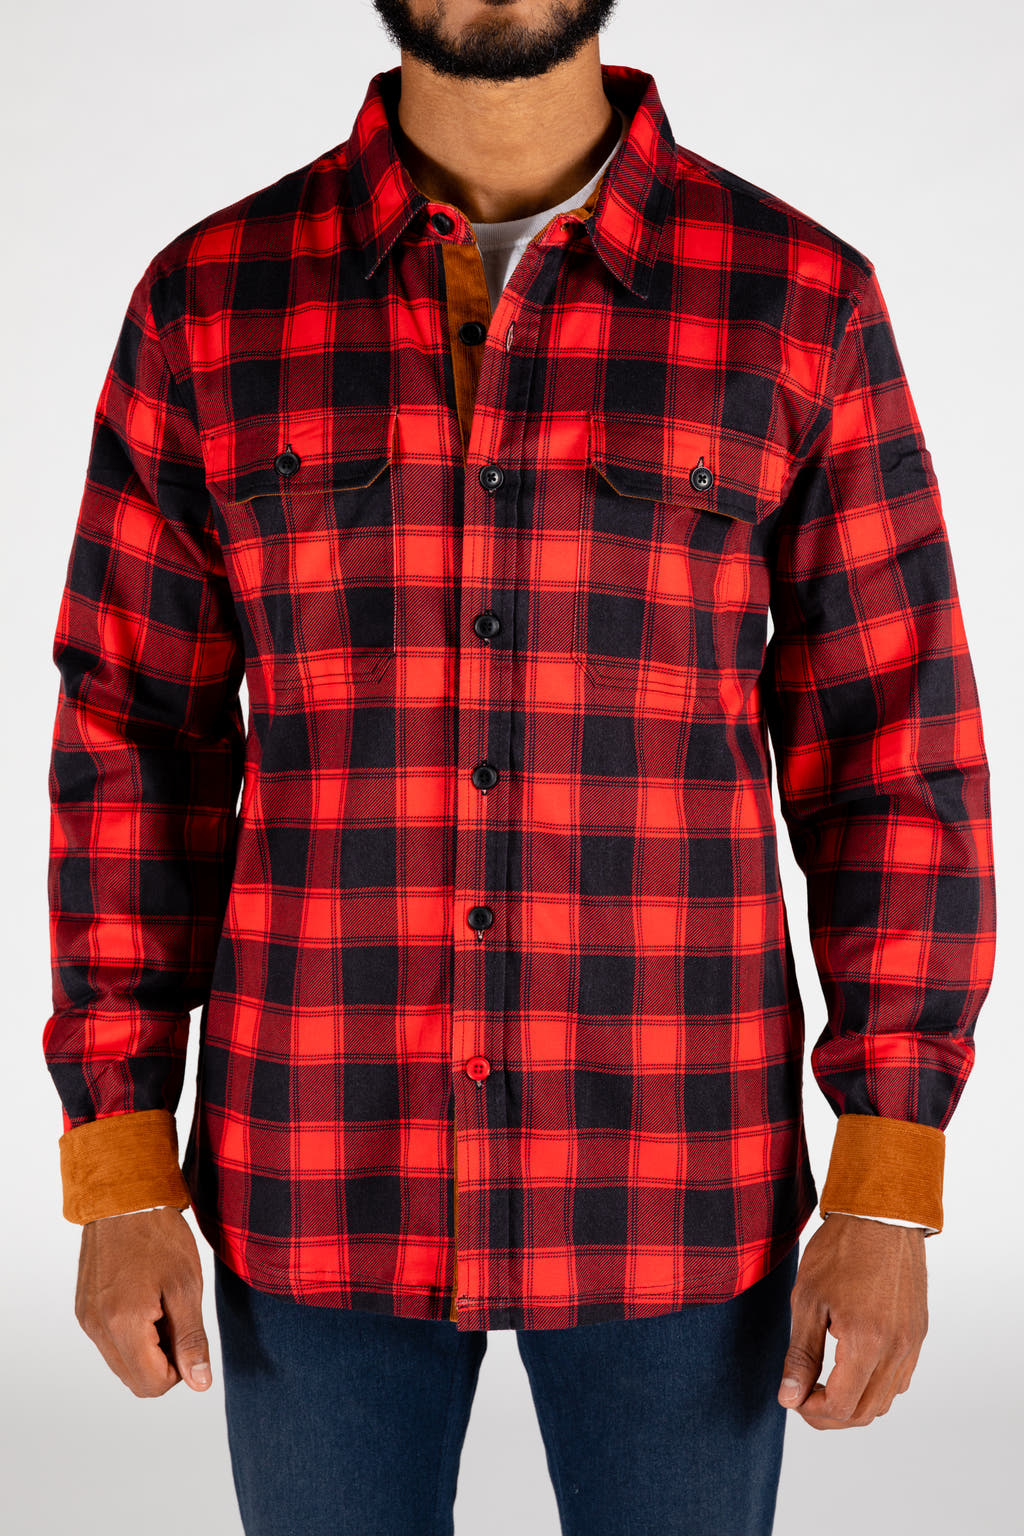 Red and black lumberjack pattern flannel